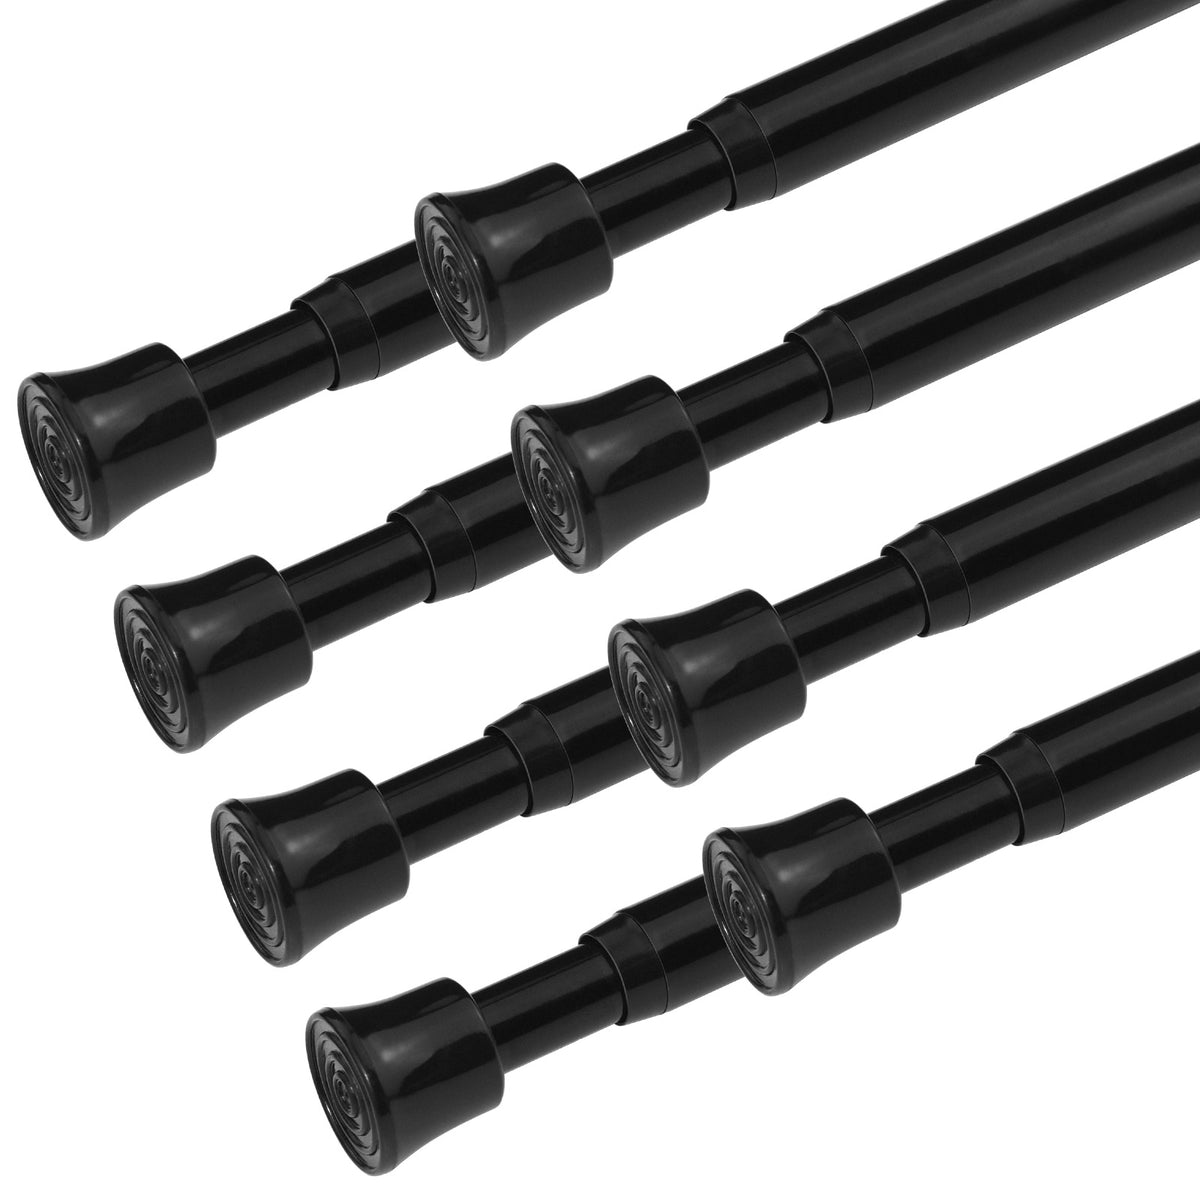 Black Spring Tension Curtain Rods 3 Sizes